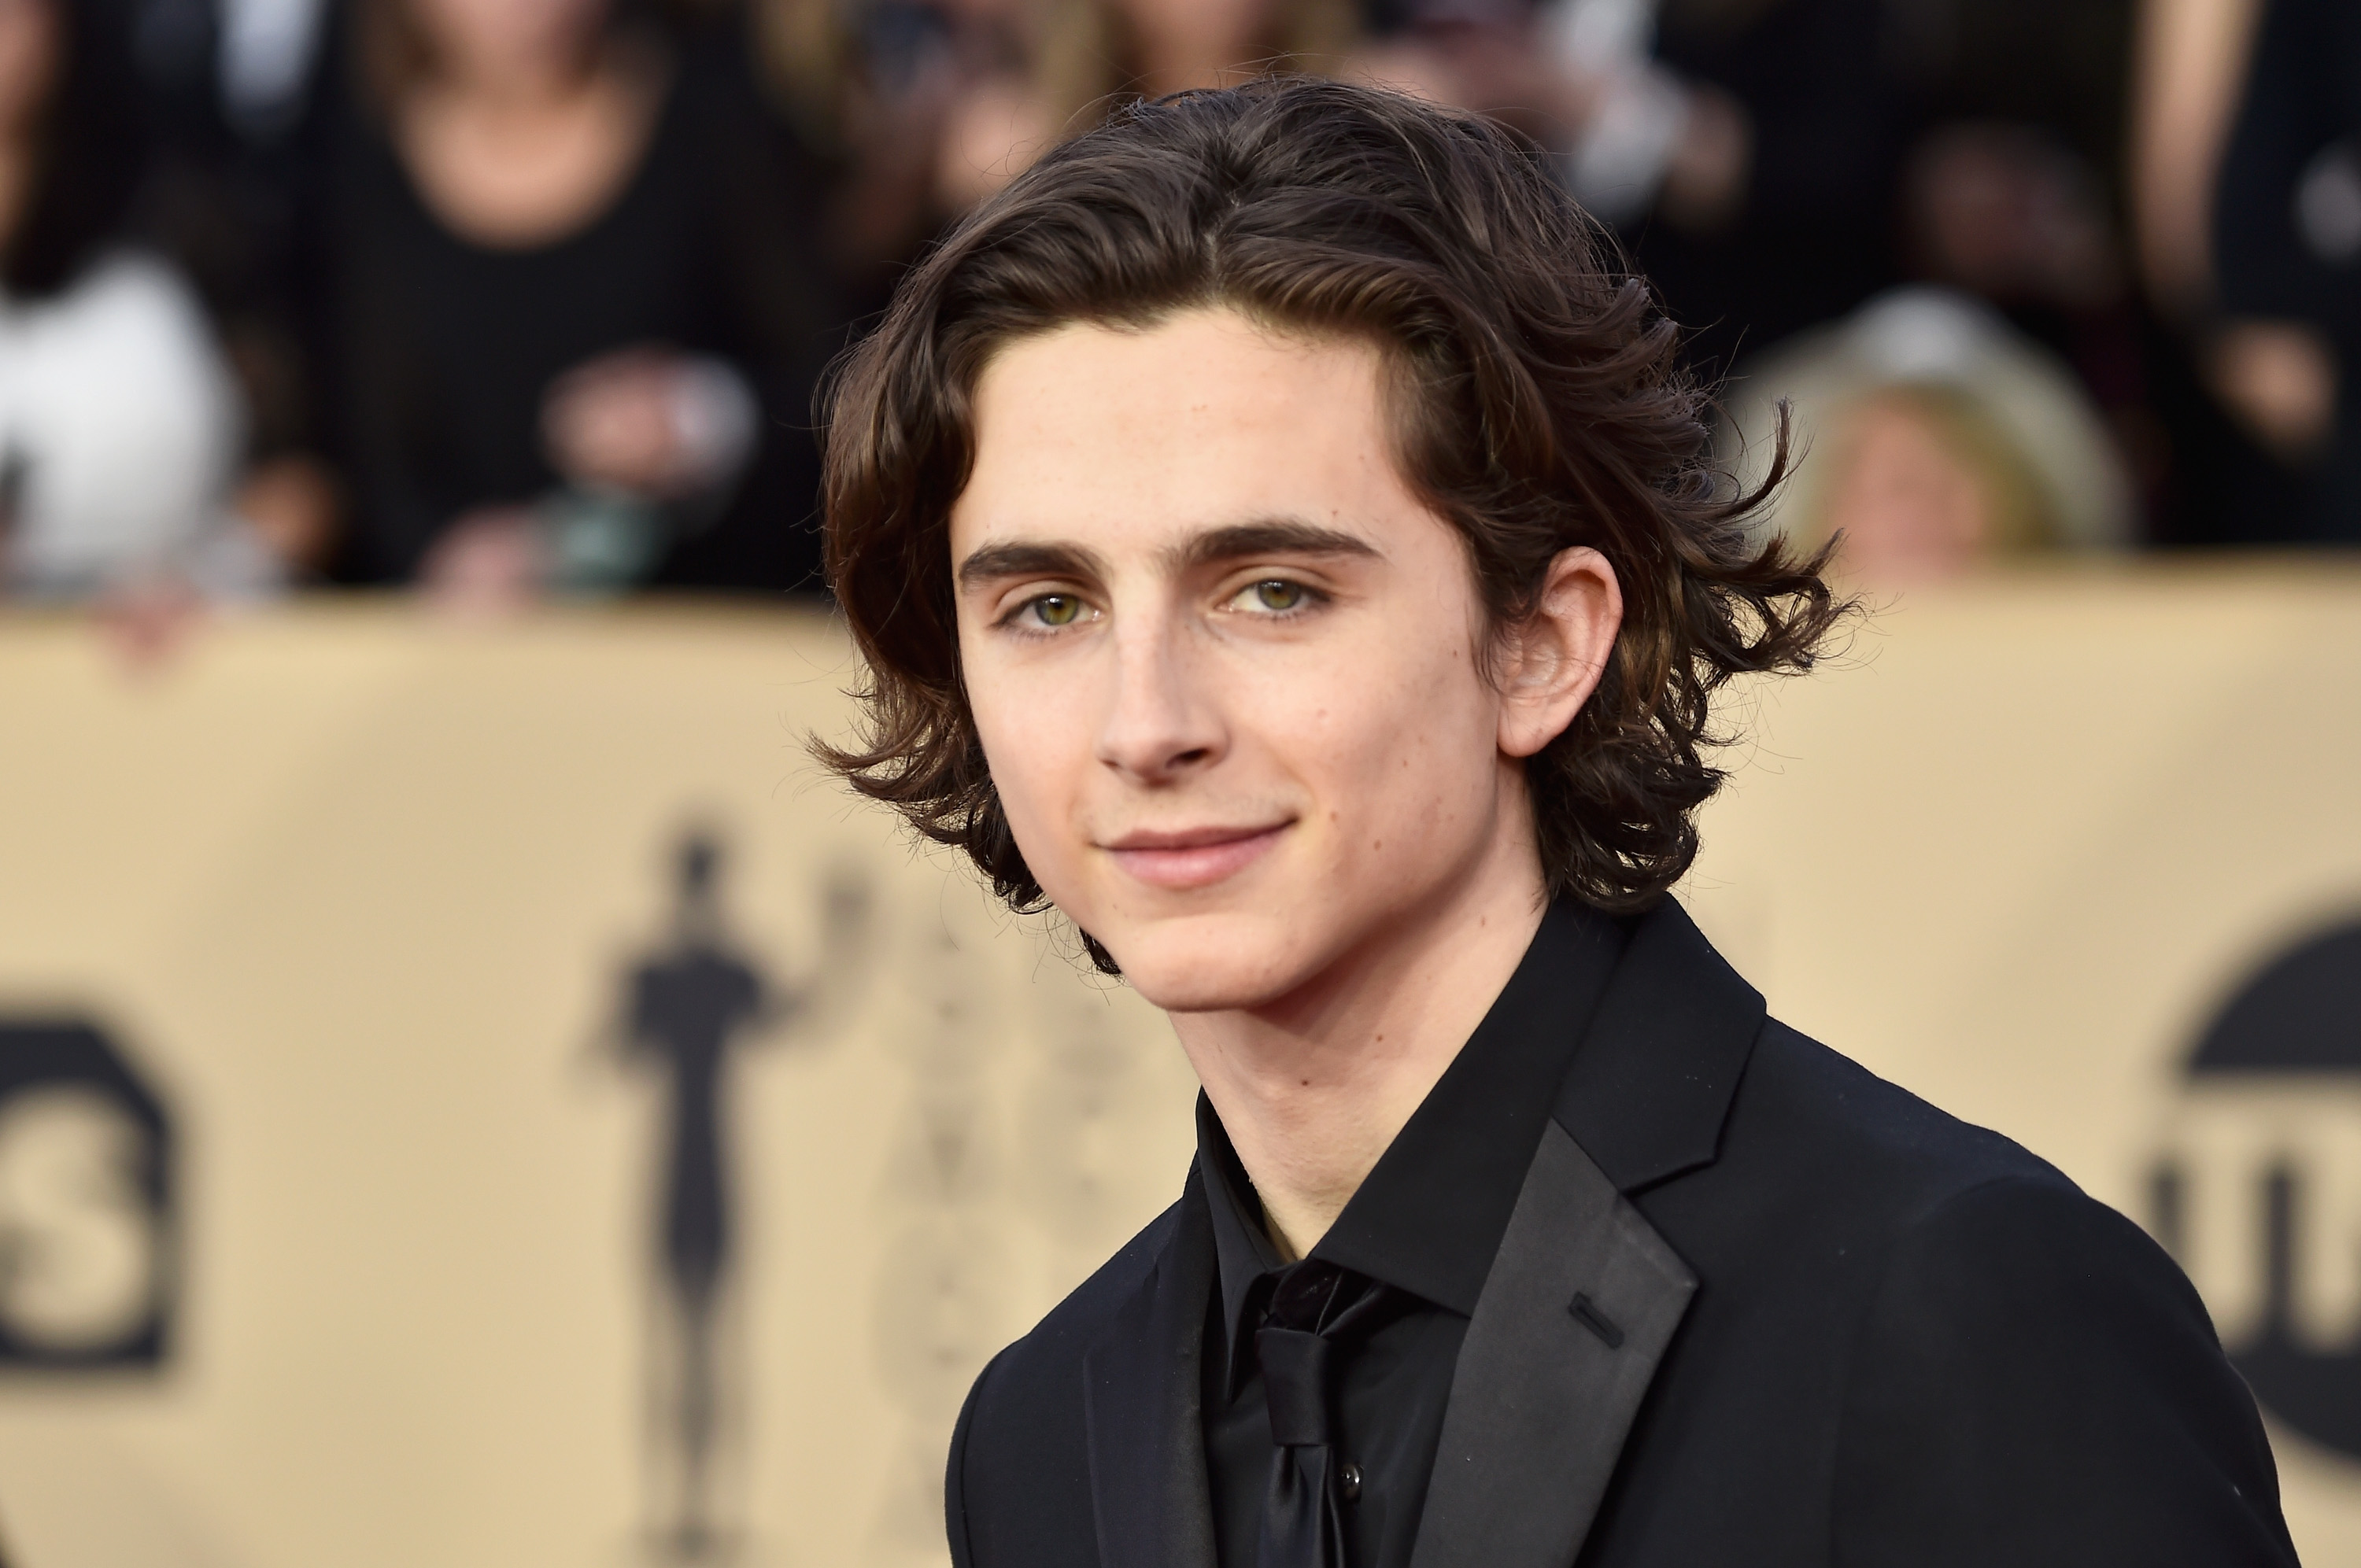 Timothee Chalamet on January 21, 2018 in Los Angeles | Source: Getty Images